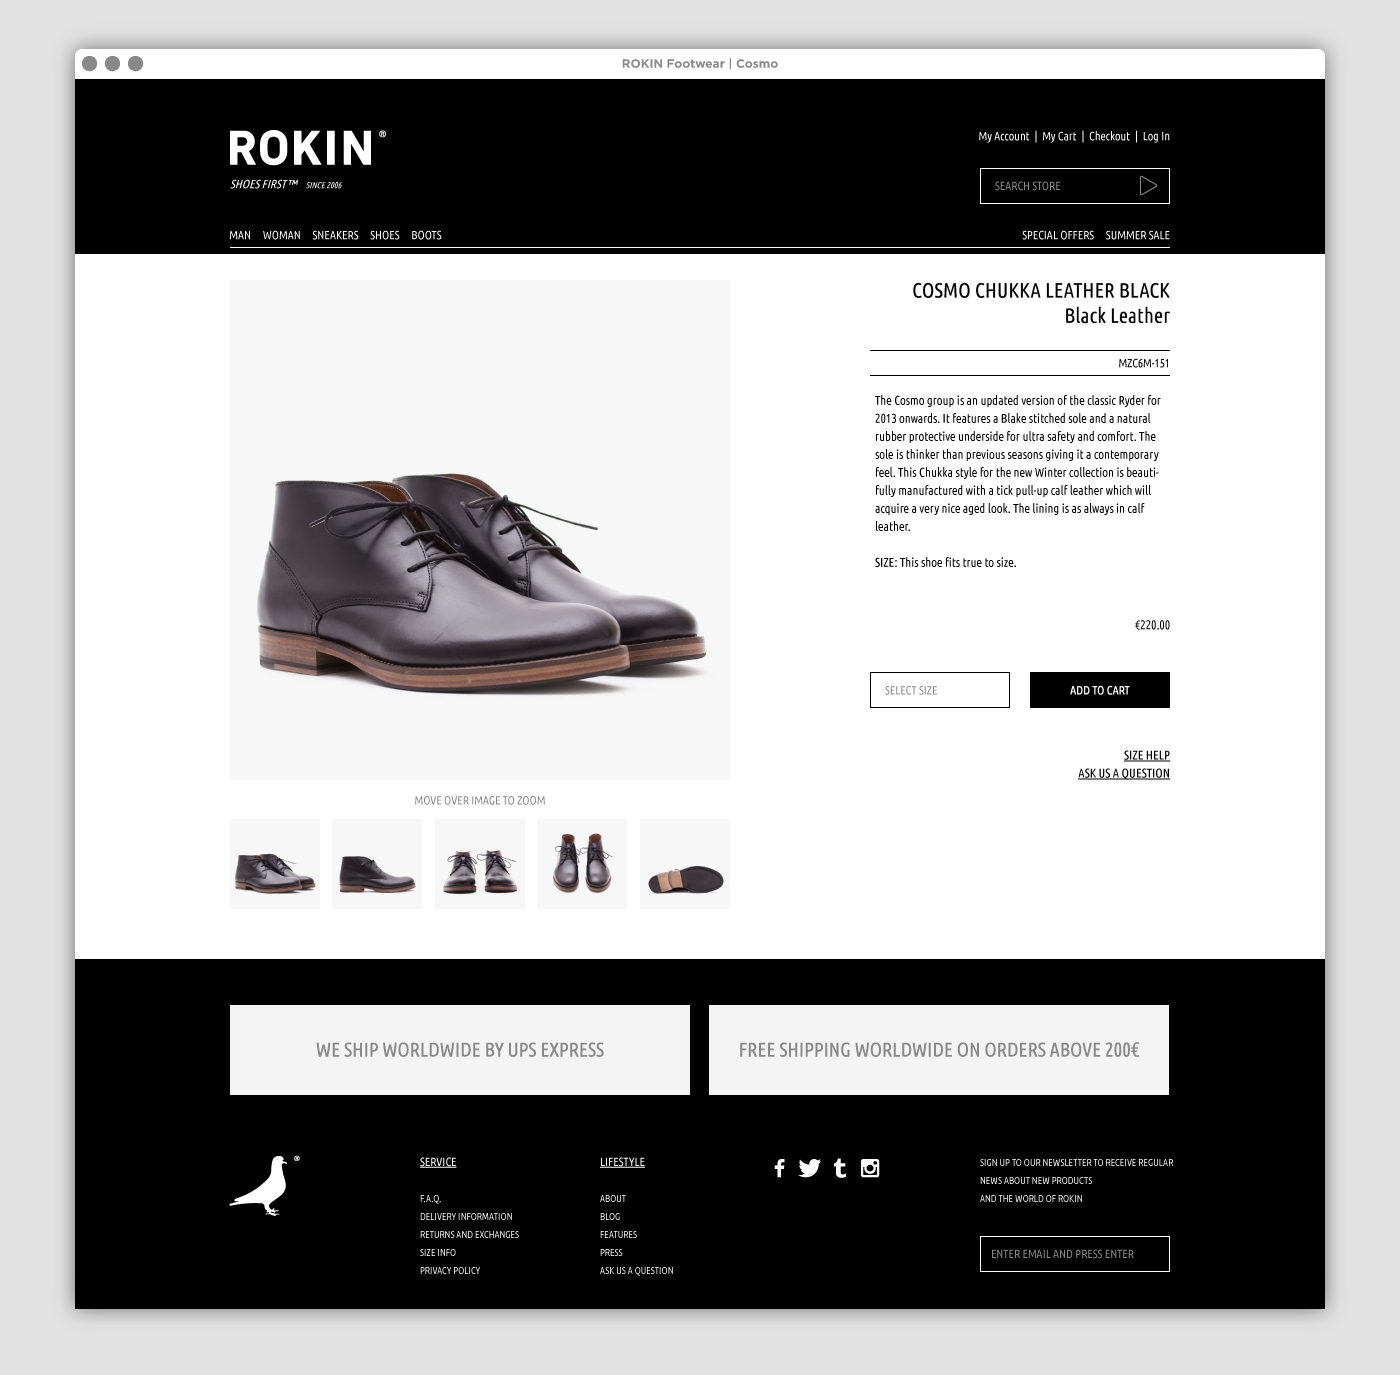 footwear shoes boots rokin e-commerce magento Website